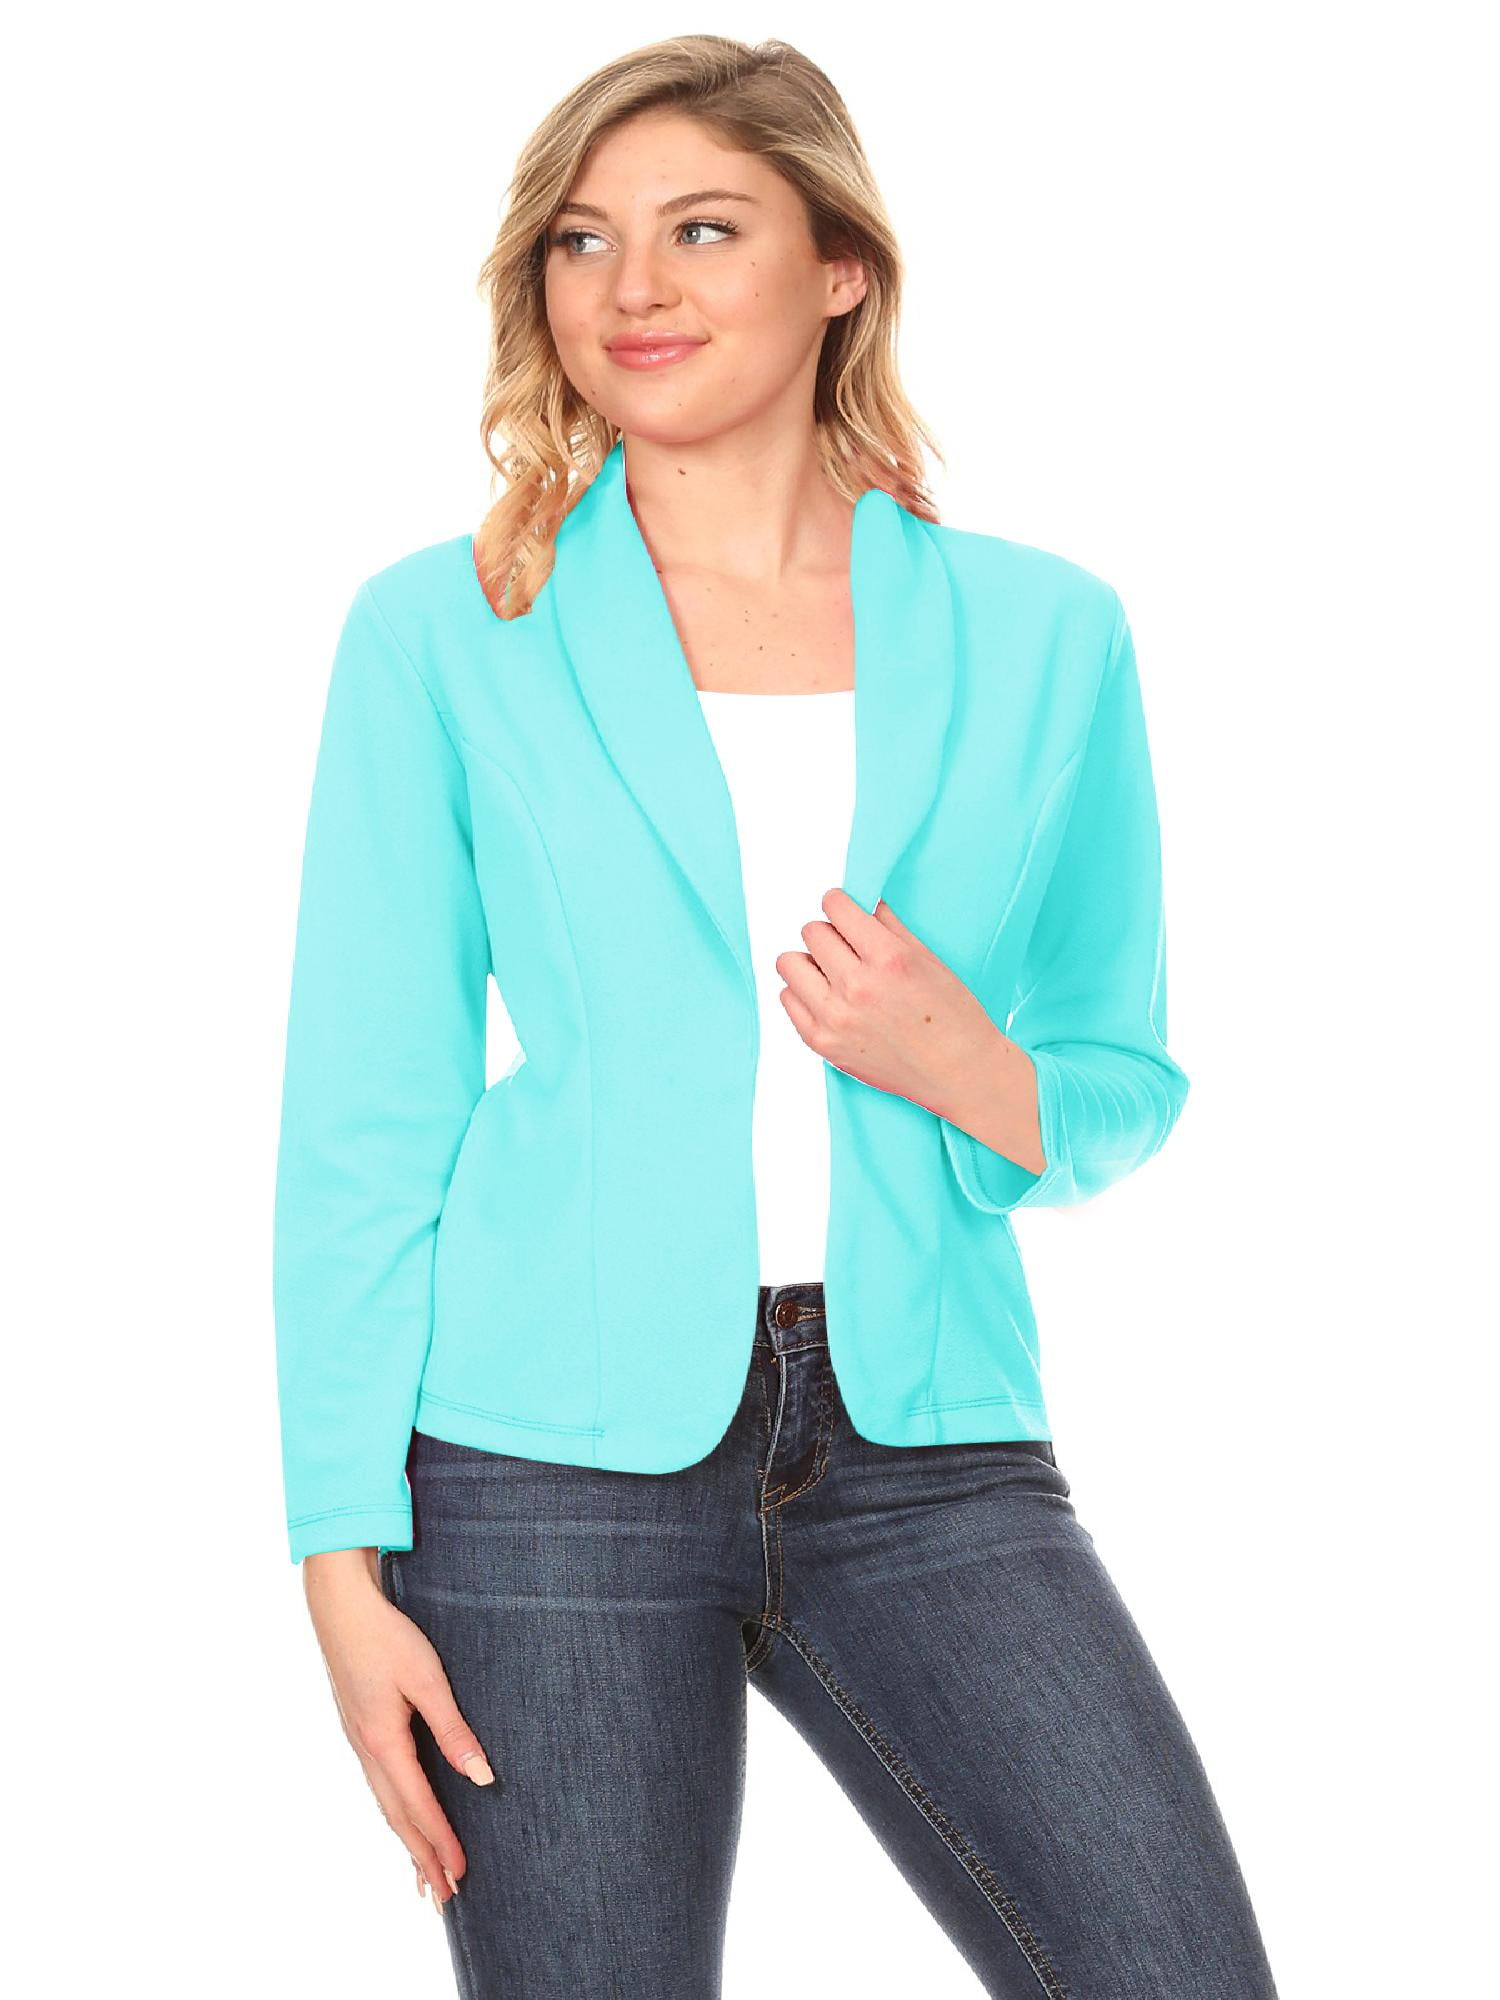 Women's Solid Casual Office Work Long Sleeve Open Front Blazer Jacket Made in USA S-3XL